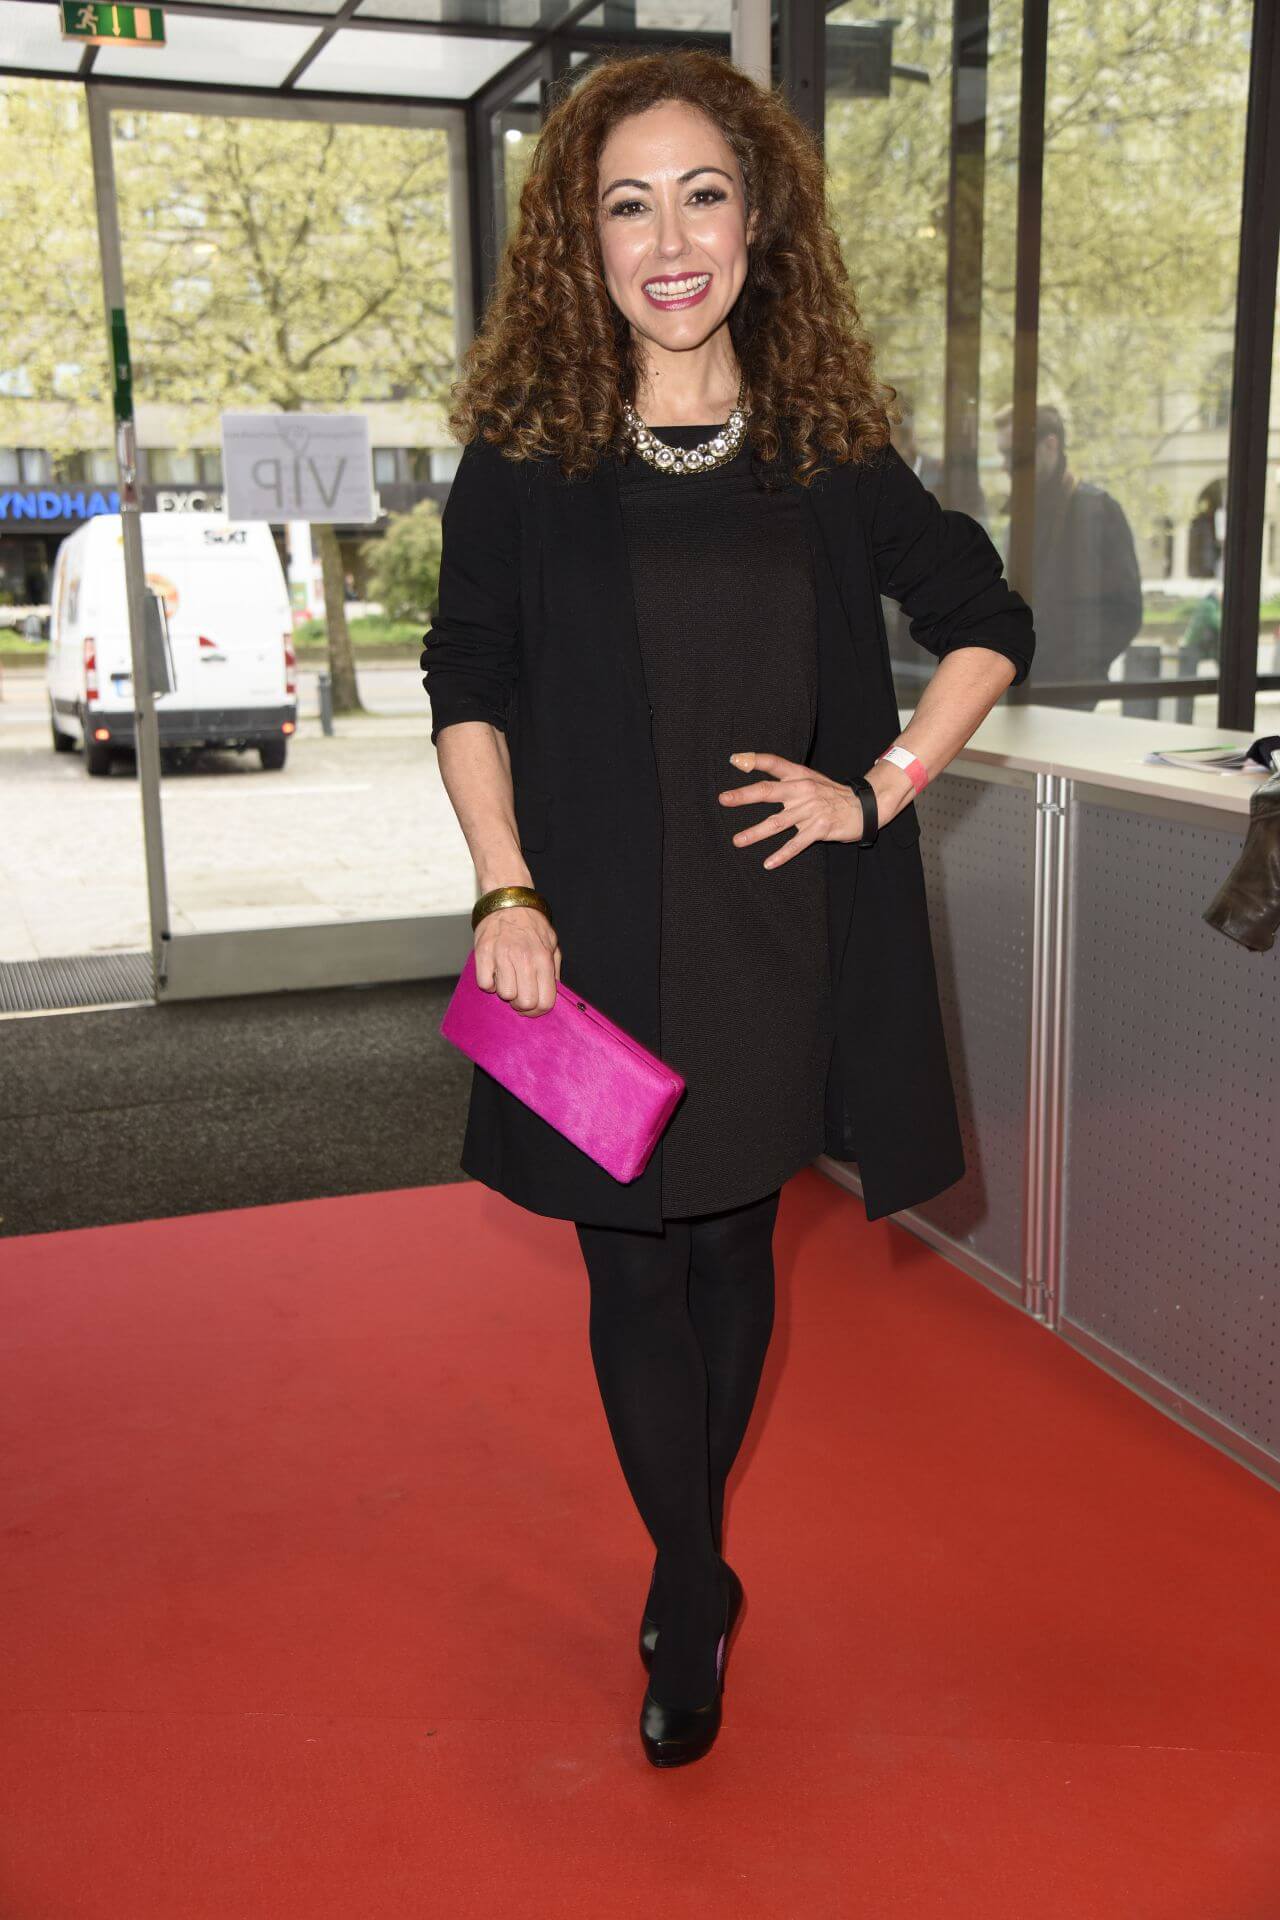 Anastasia Zampounidis In Black Long Cardigan & Coat With Stockings At Victress Awards Gala in Berlin